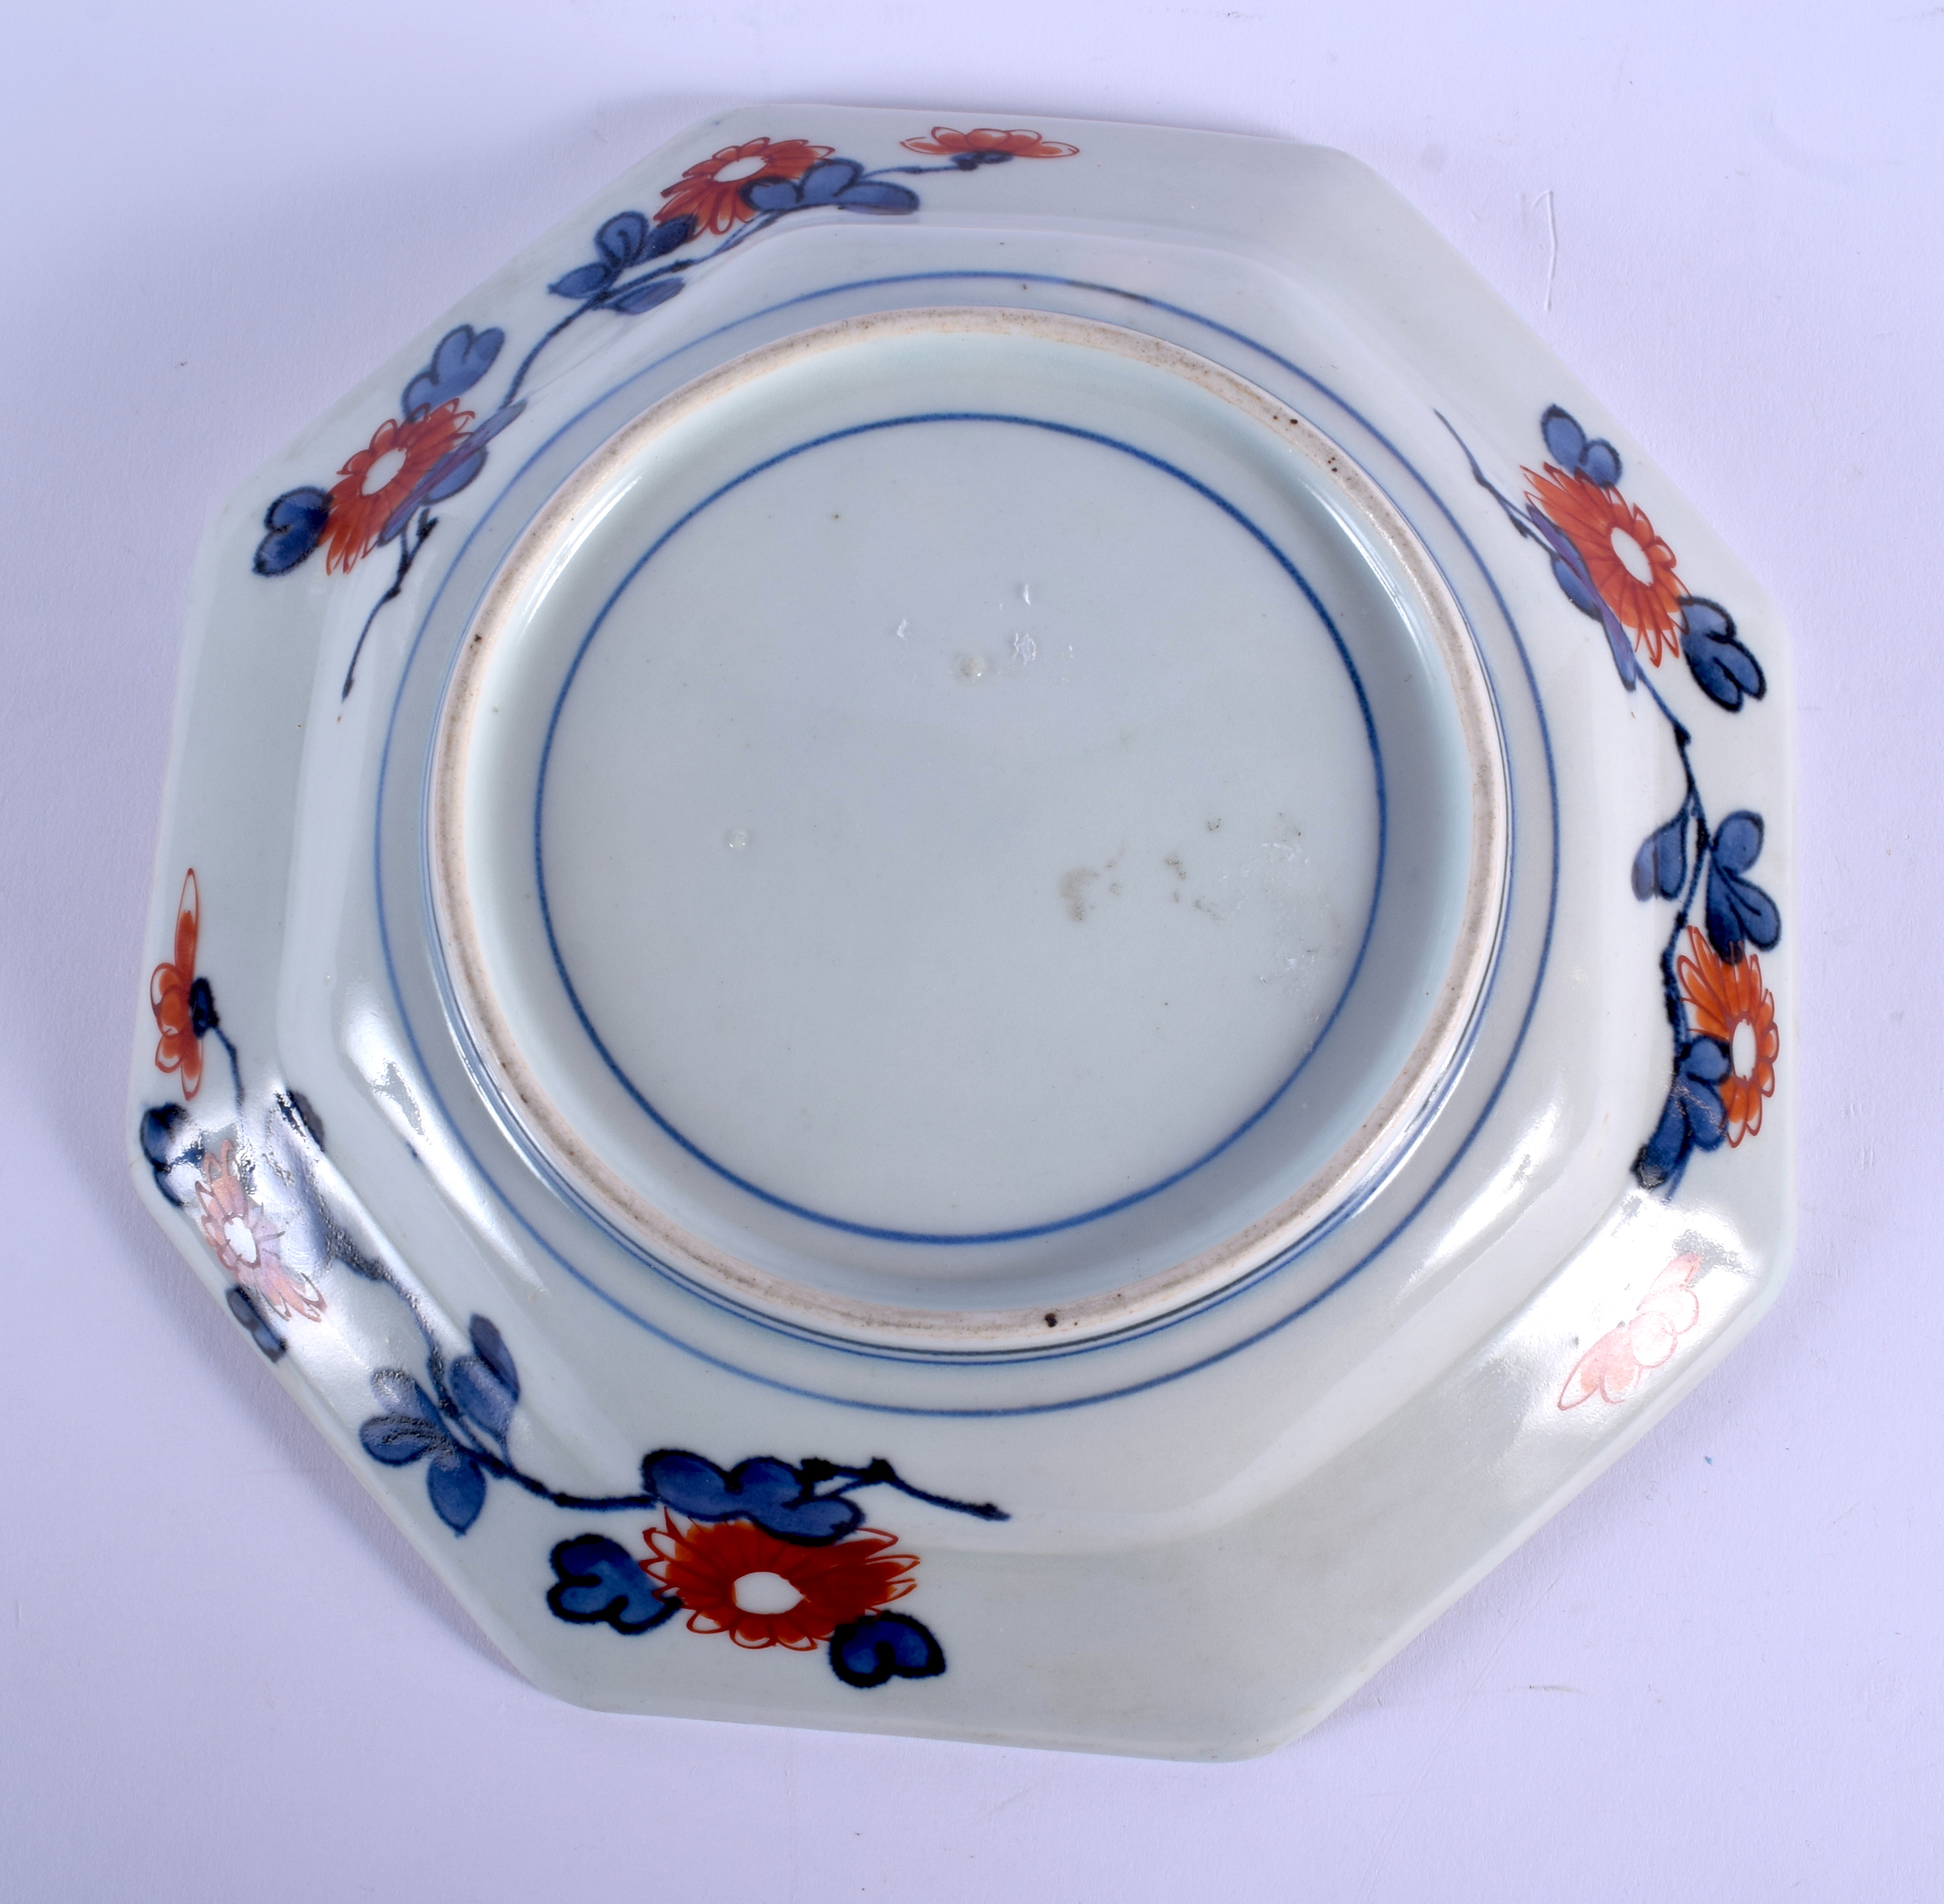 AN 18TH CENTURY JAPANESE EDO PERIOD IMARI OCTAGONAL PORCELAIN DISH painted with floral sprays. 21 cm - Image 5 of 5